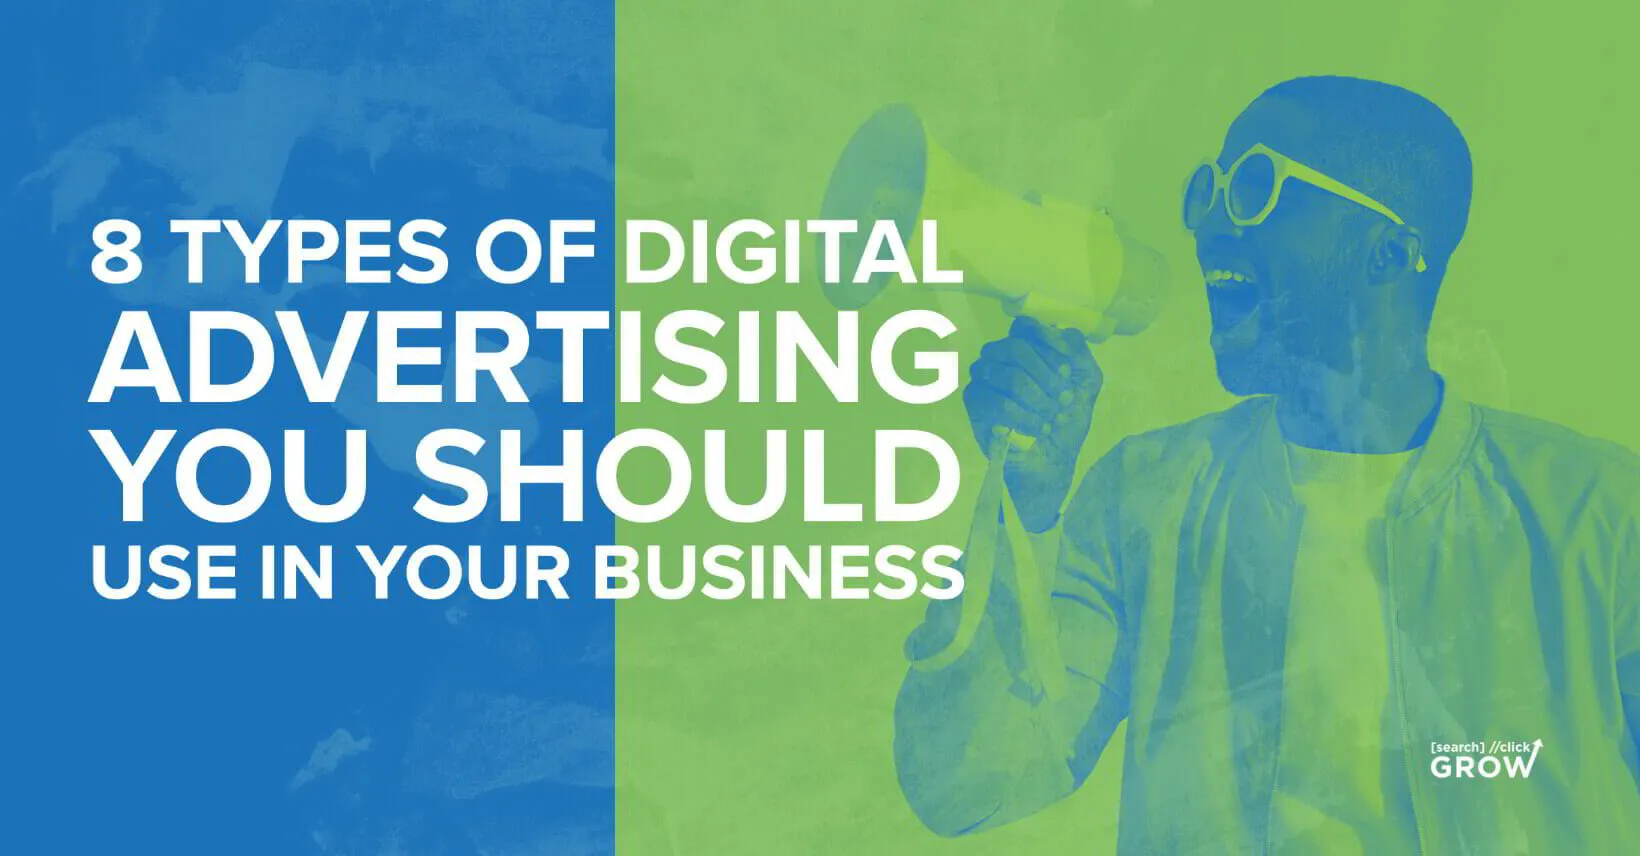 8 Types of Digital Advertising You Should Use in Your Business